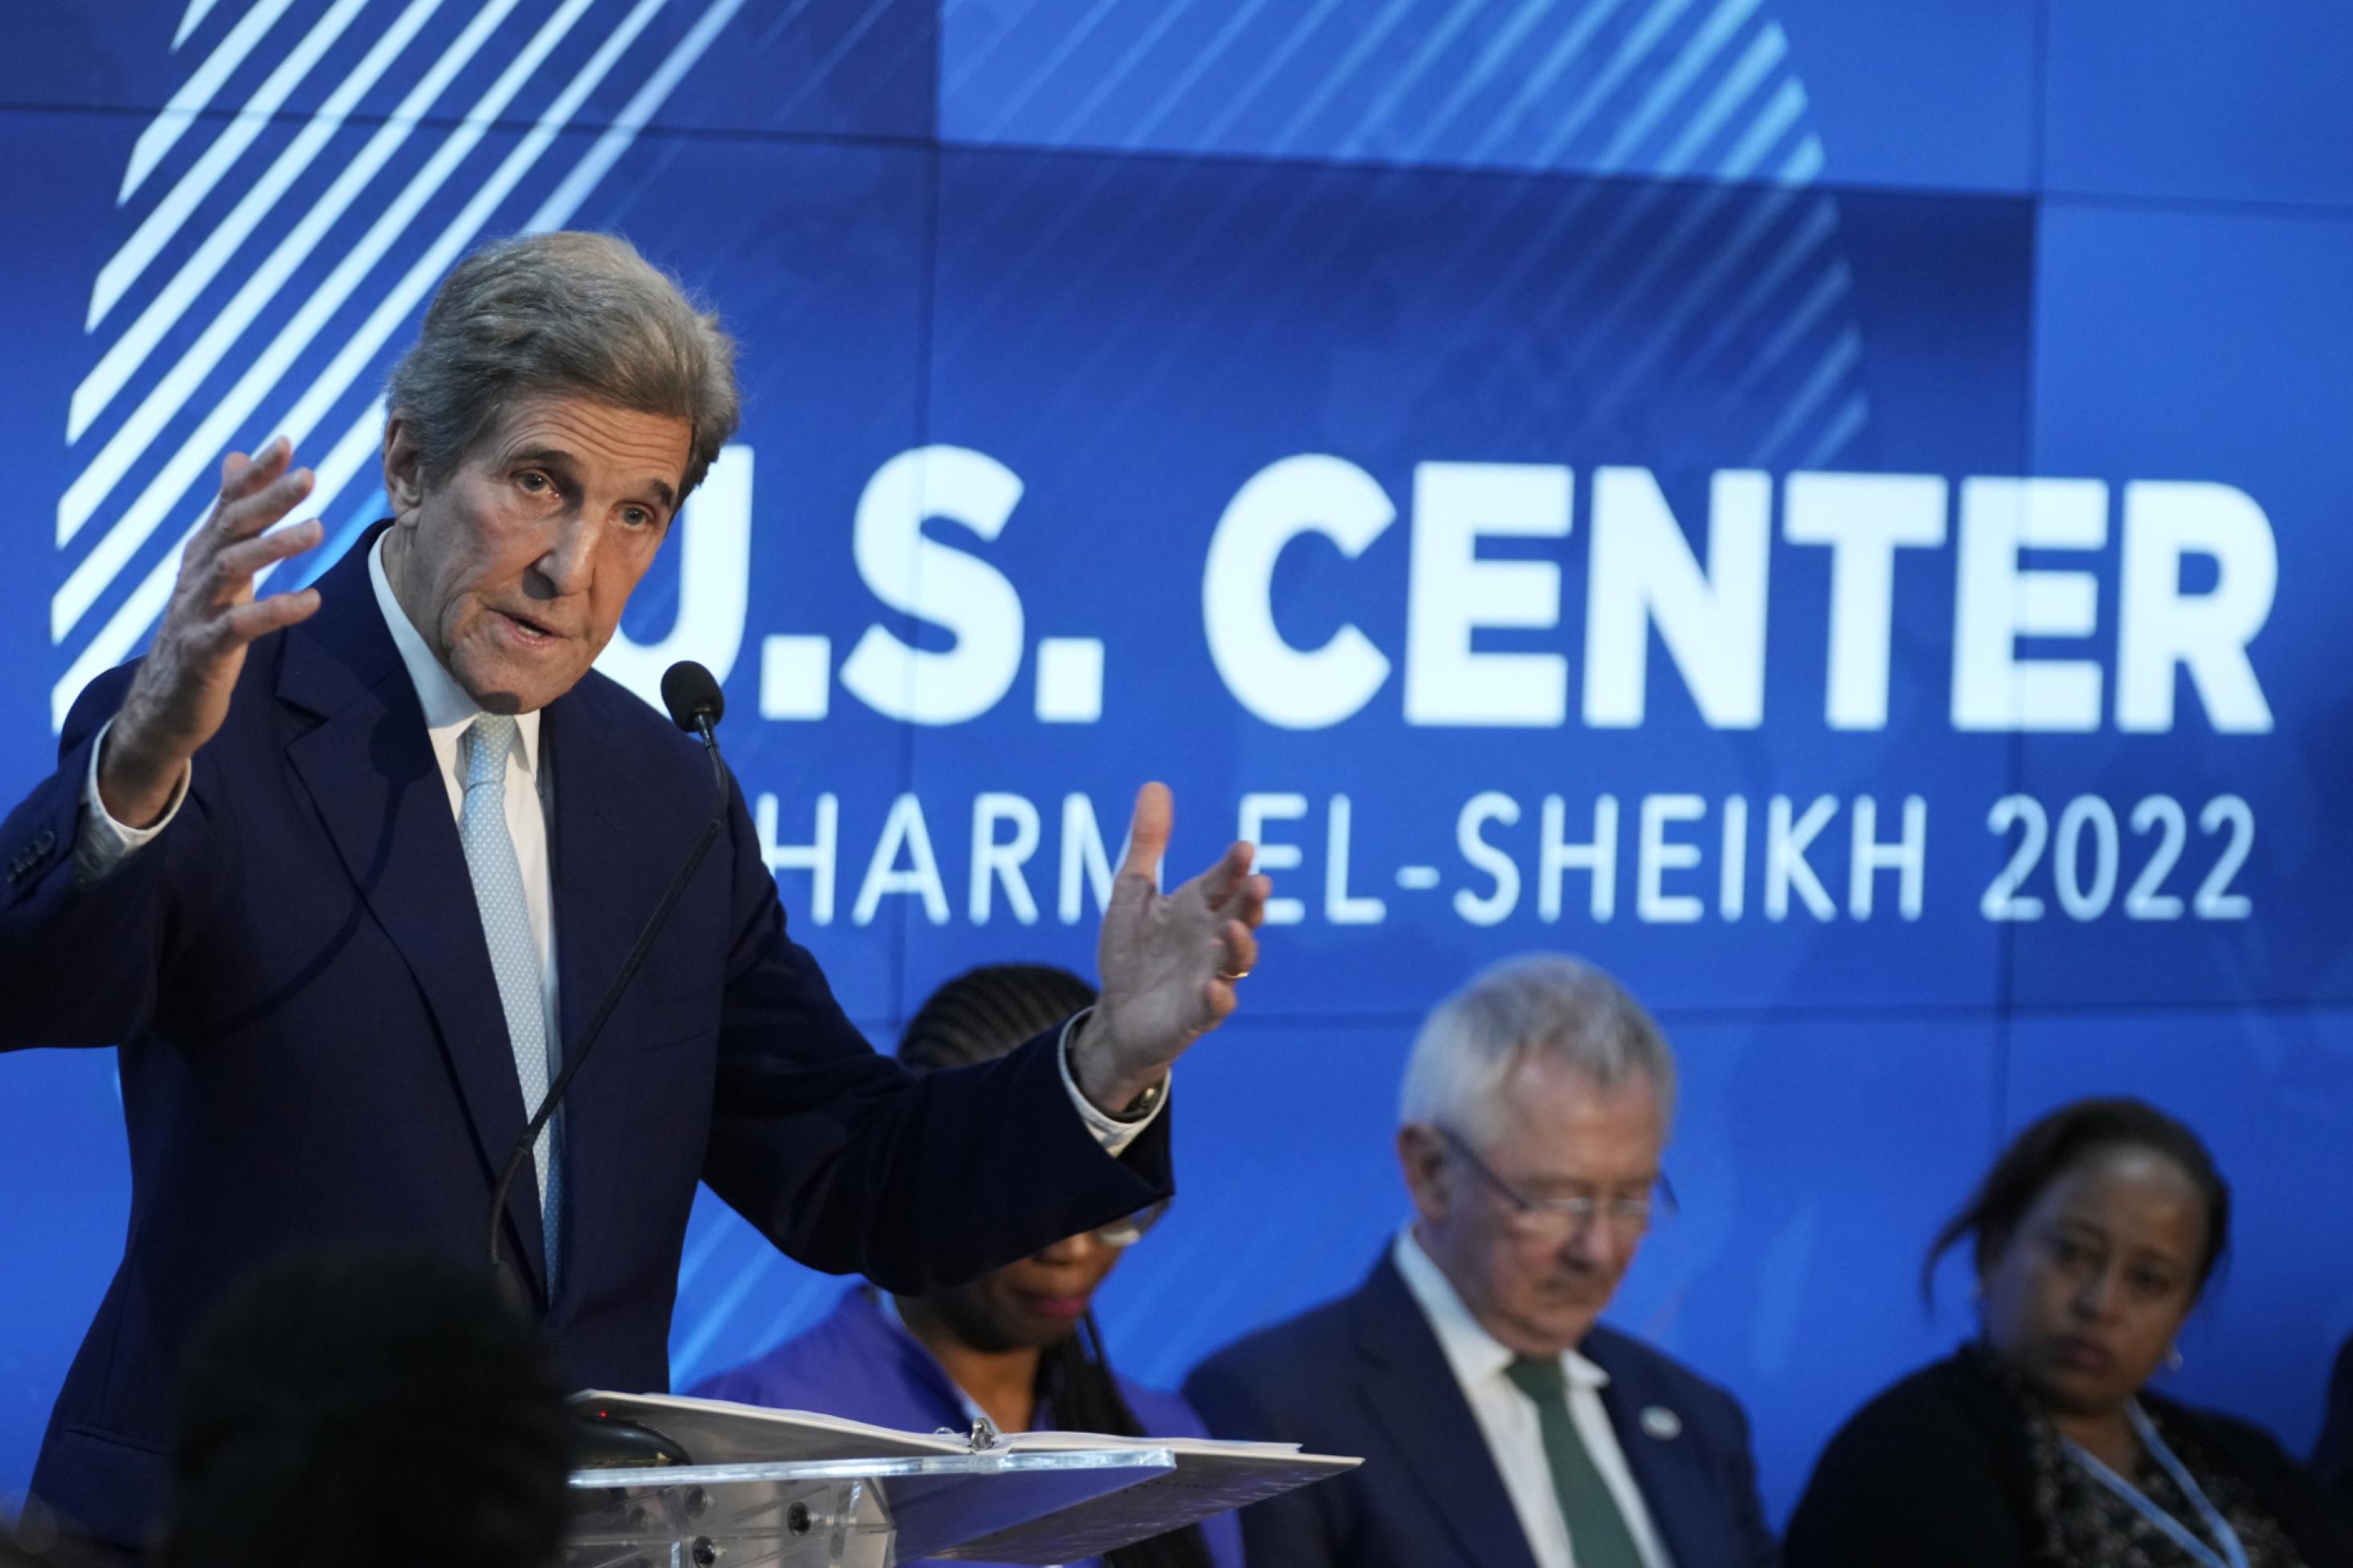 U.S. Special Presidential Envoy for Climate John Kerry speaks during a session on Accelerating the Clean Energy Transition in Developing Countries at the COP27 U.N. Climate Summit, Wednesday, Nov. 9, 2022, in Sharm el-Sheikh, Egypt. (AP Photo/Peter Dejong)